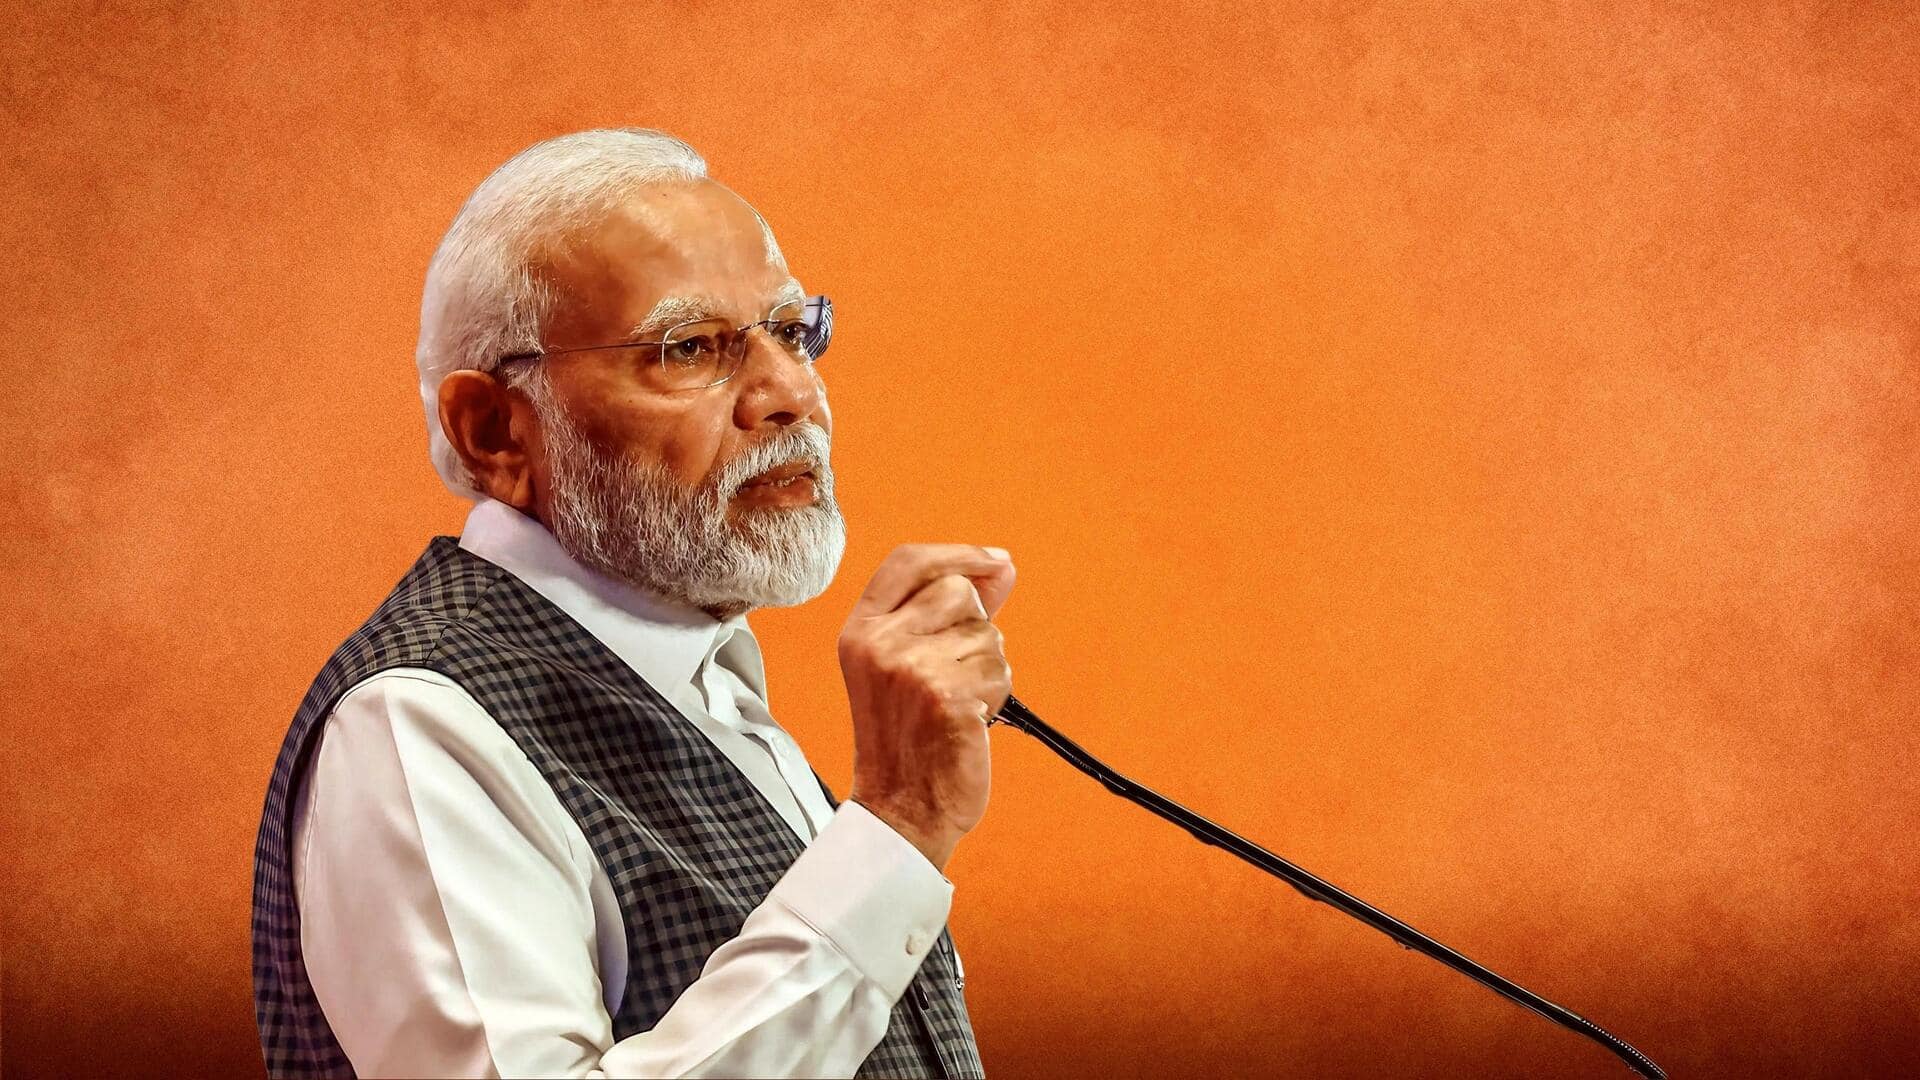 'During Sonia's rule...': PM Modi targets opposition over Godhra incident 